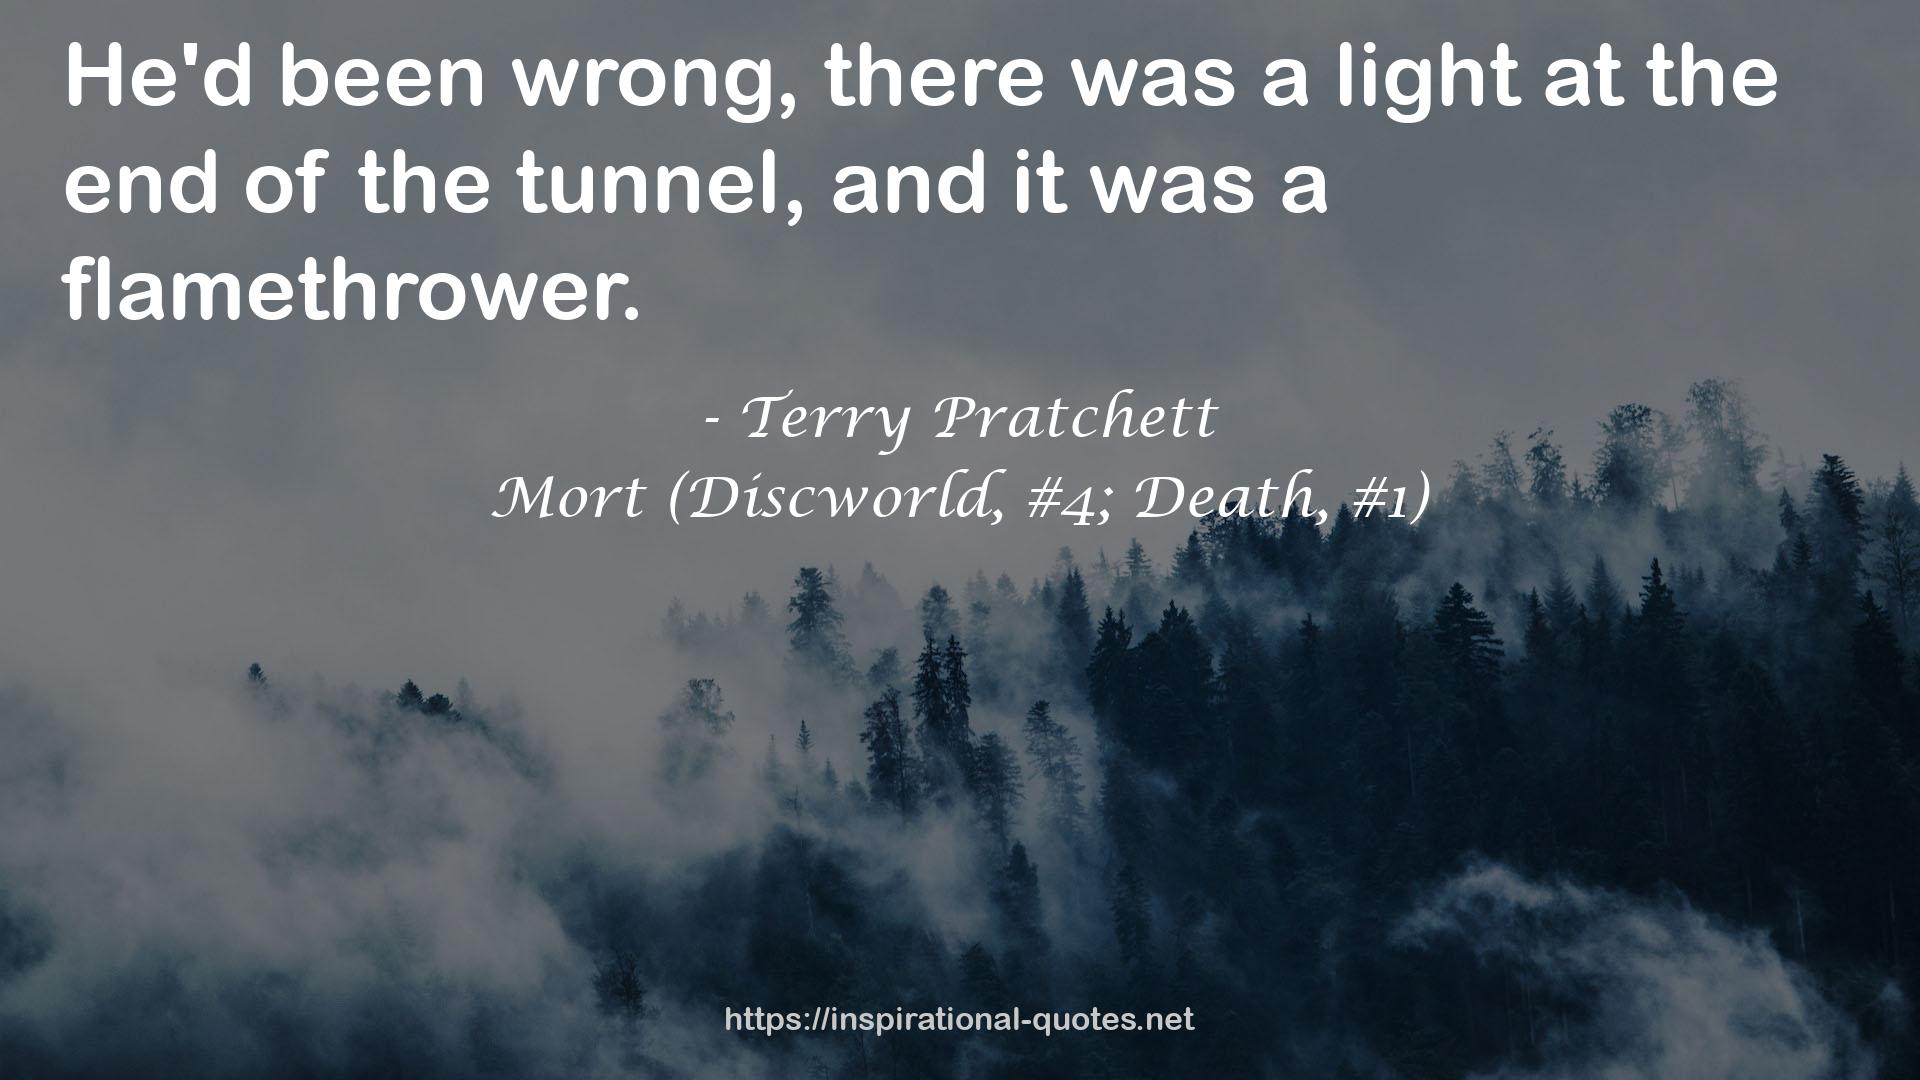 Mort (Discworld, #4; Death, #1) QUOTES